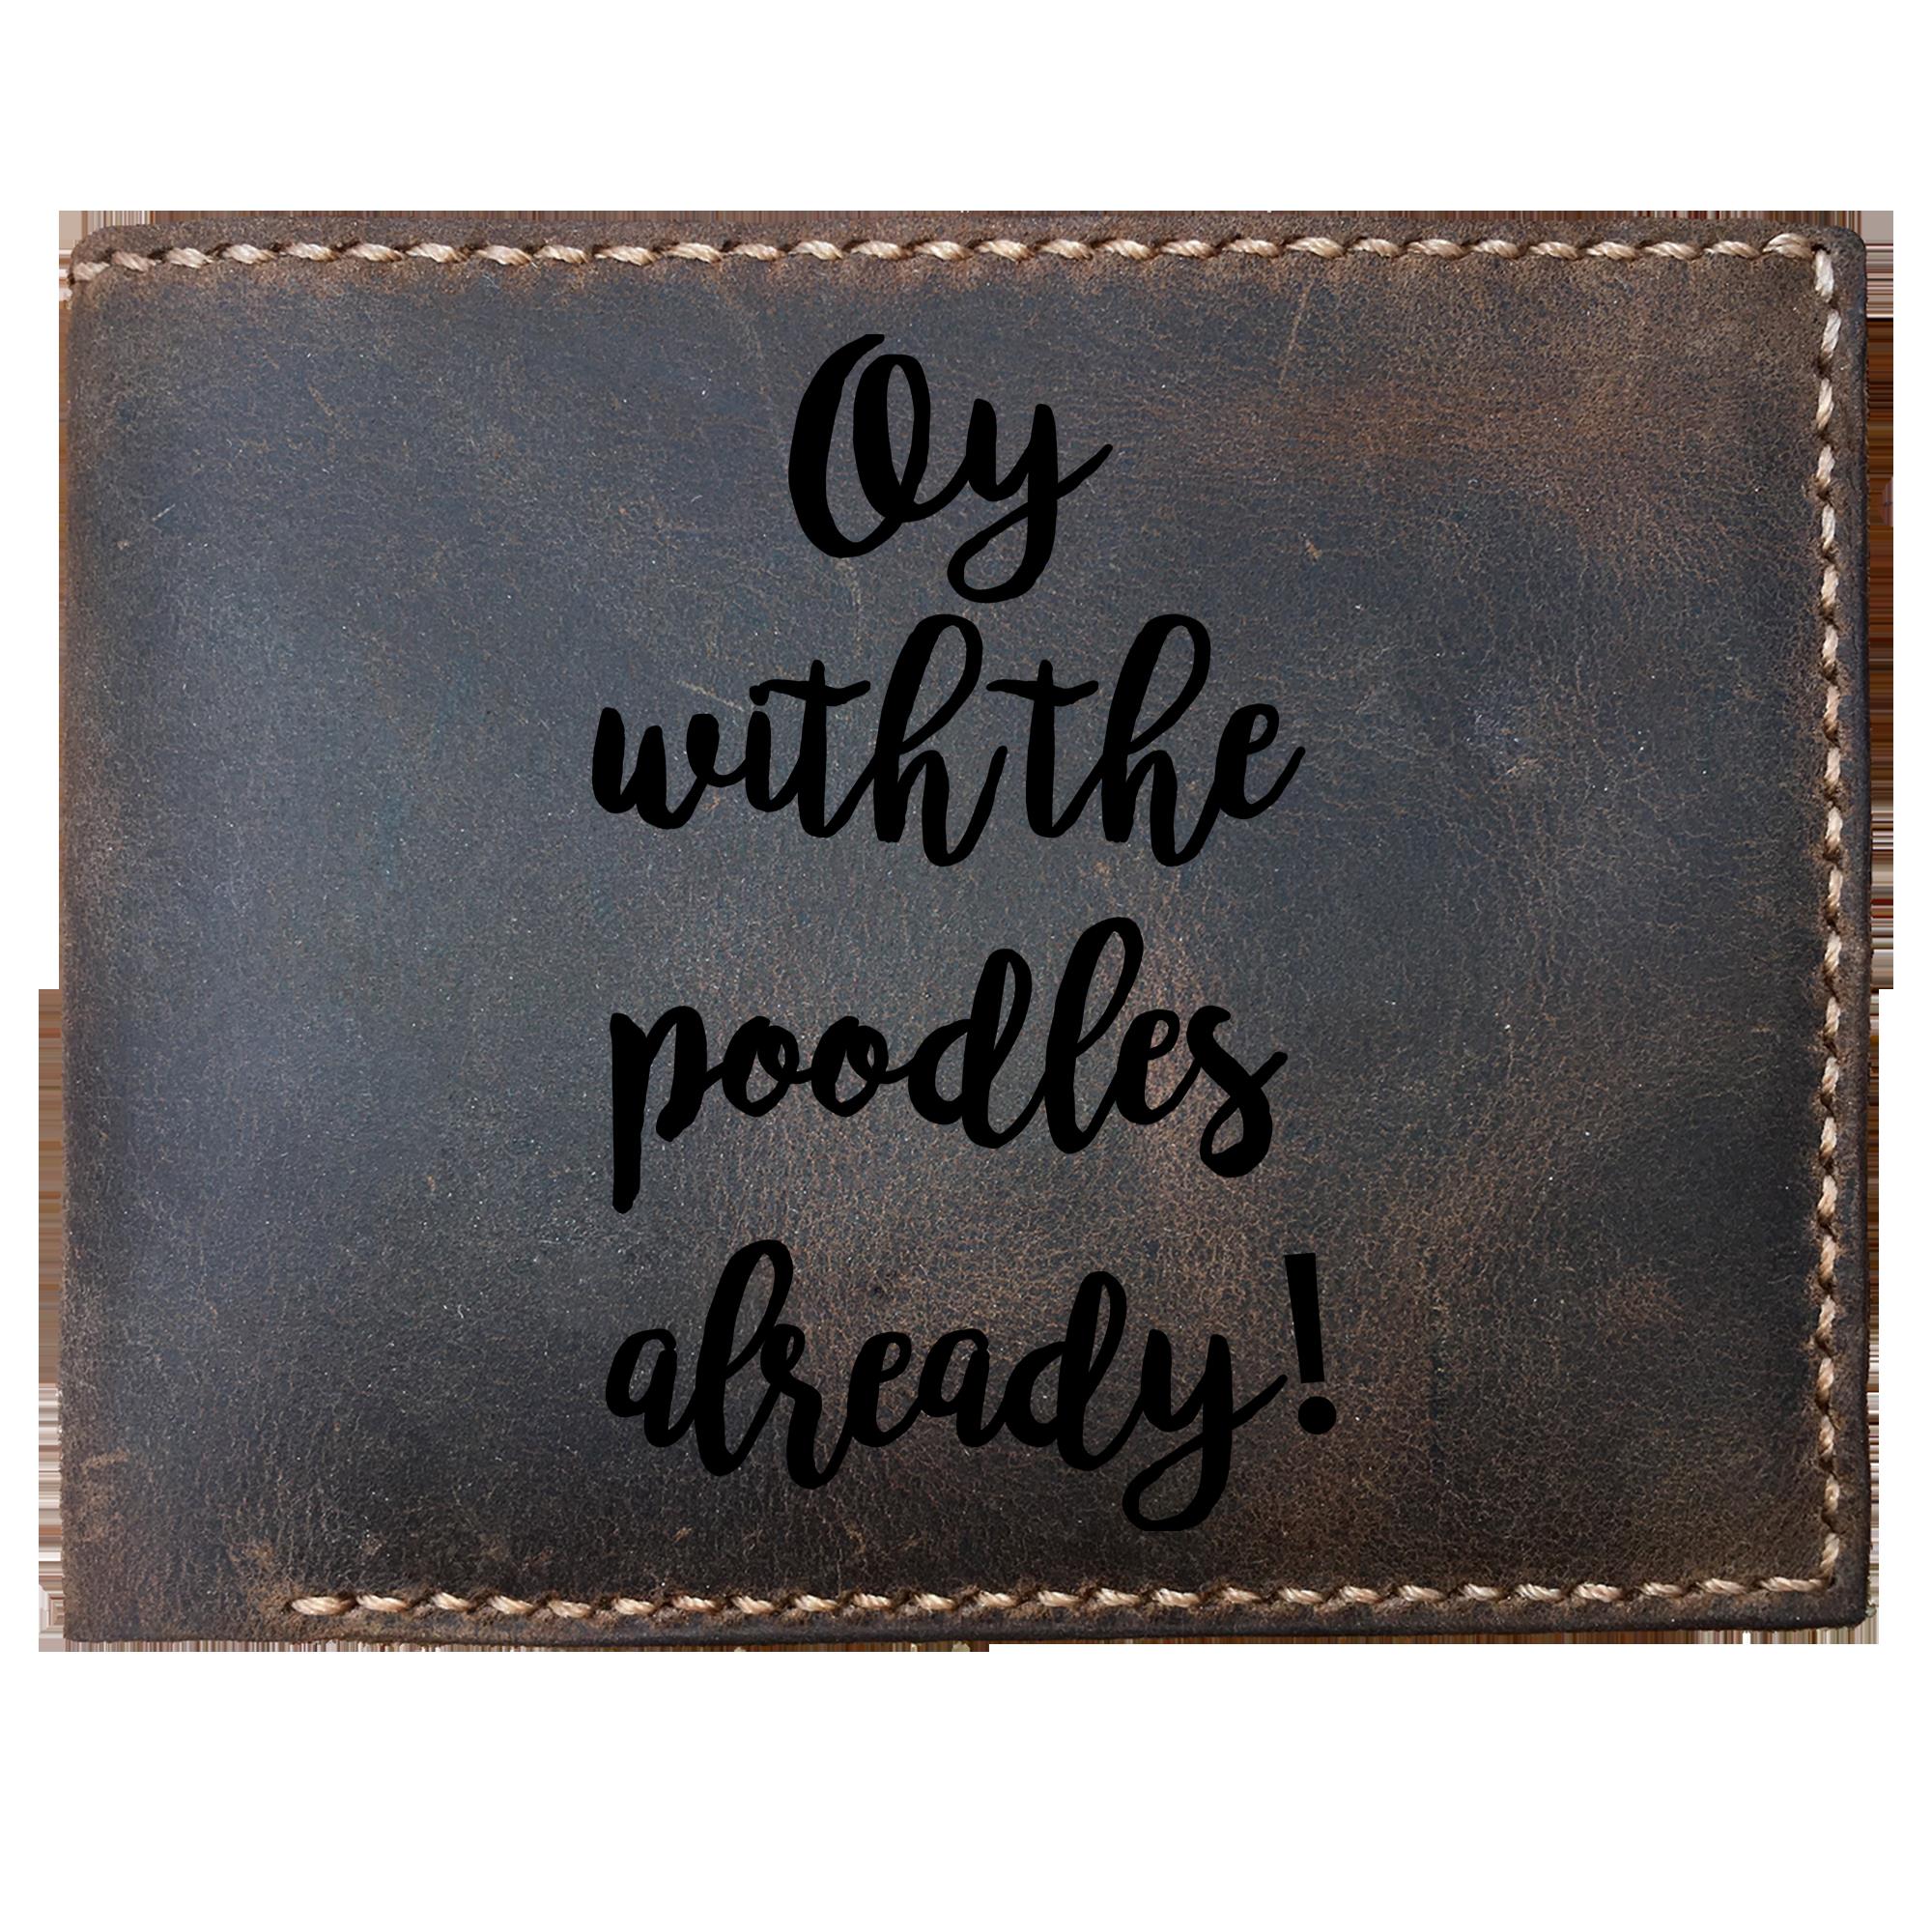 Skitongifts Funny Custom Laser Engraved Bifold Leather Wallet For Men, Oy With The Poodles Already Inspired By Gilmore Girls